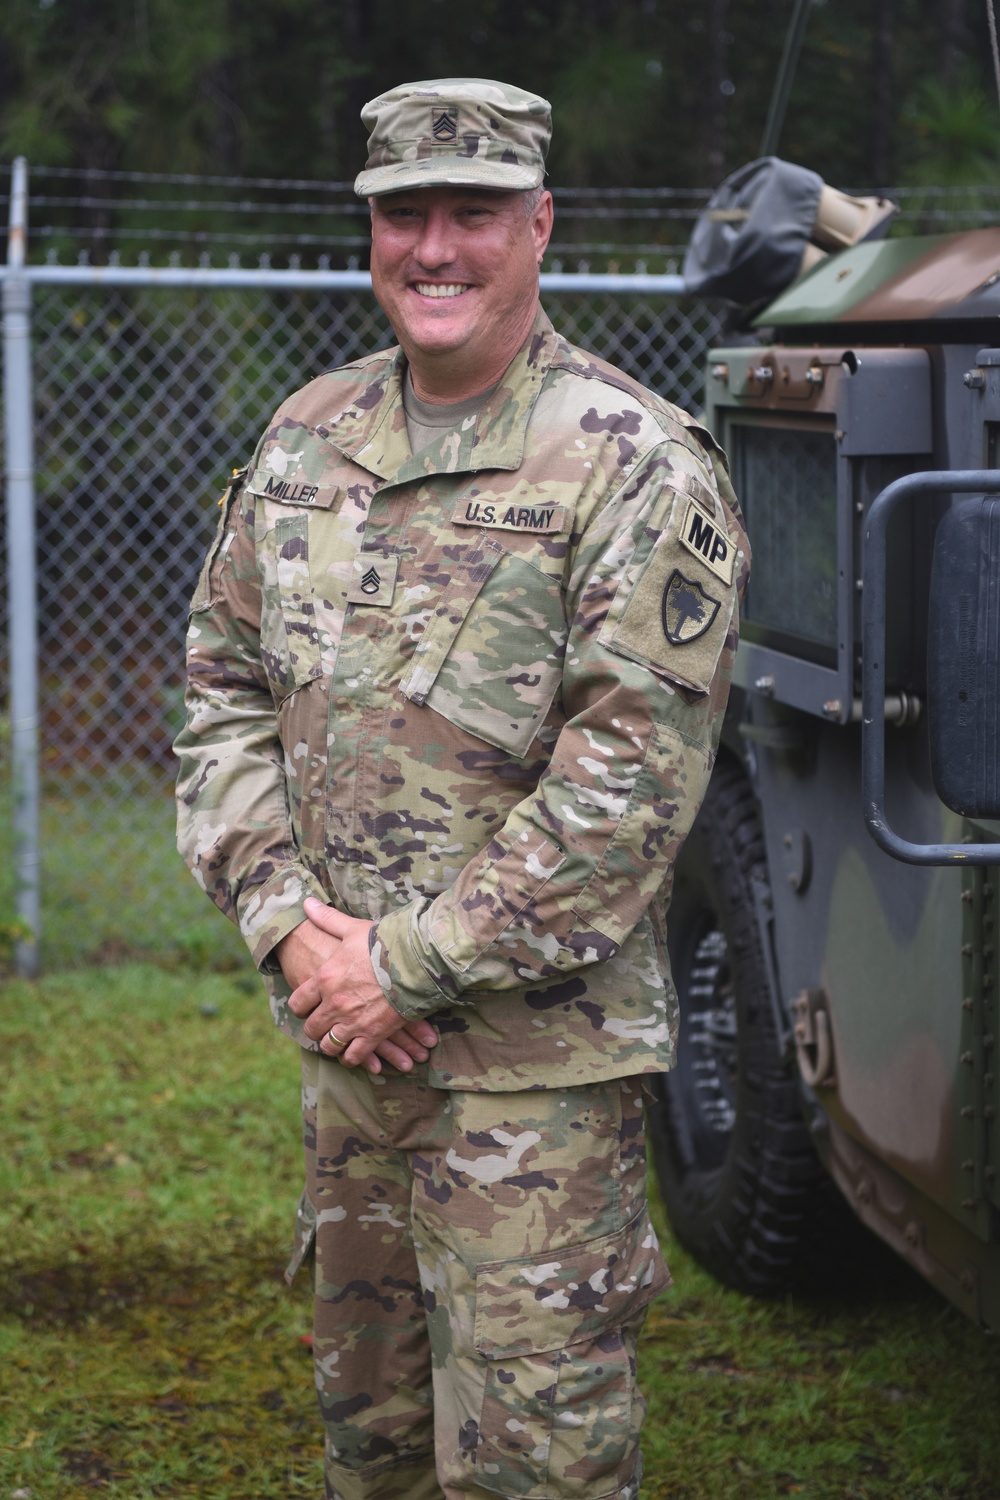 A time of emergency means it's time to serve for this South Carolina National Guardsman